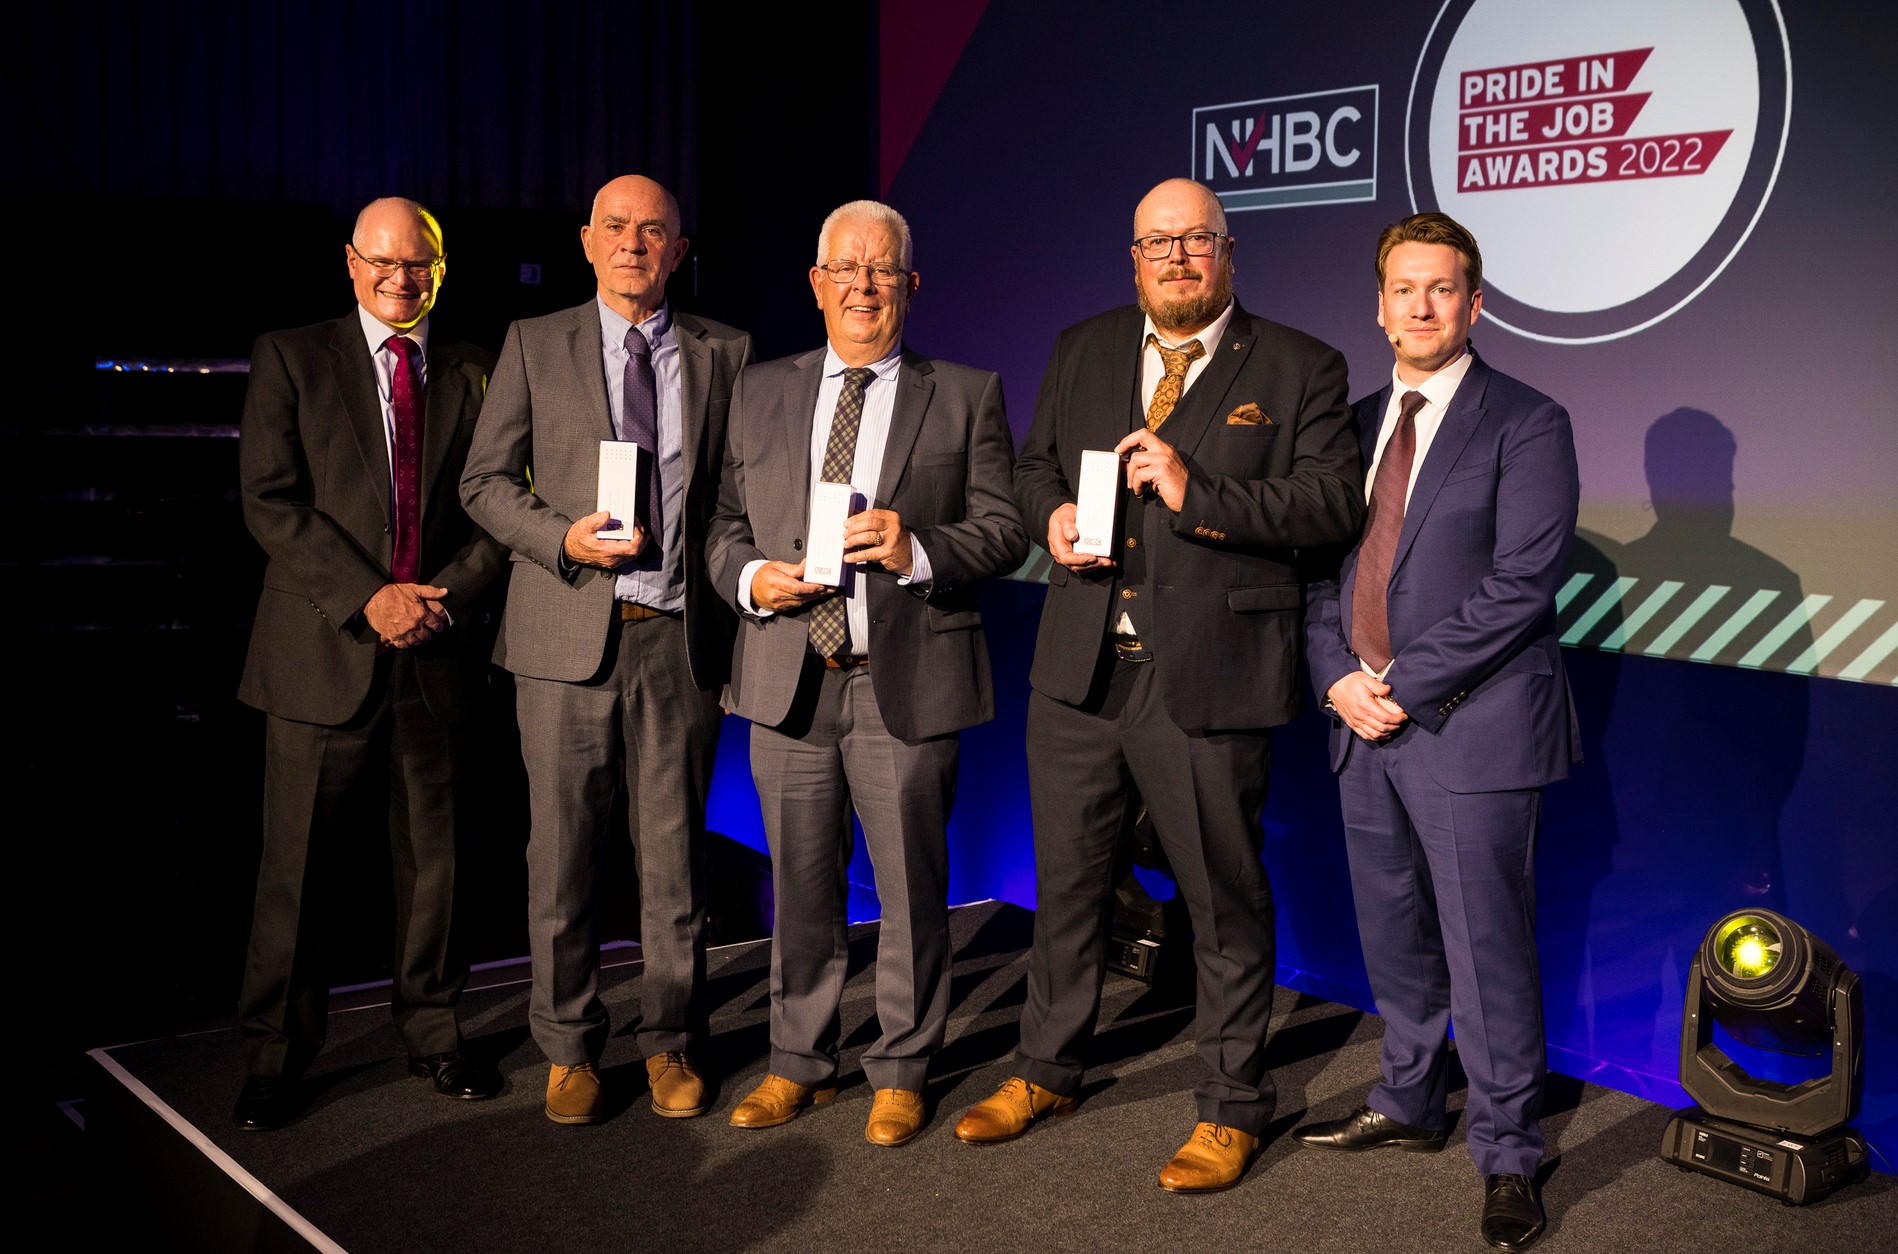 the east regional winners of nhbc's pride in the job award smiling at the camera